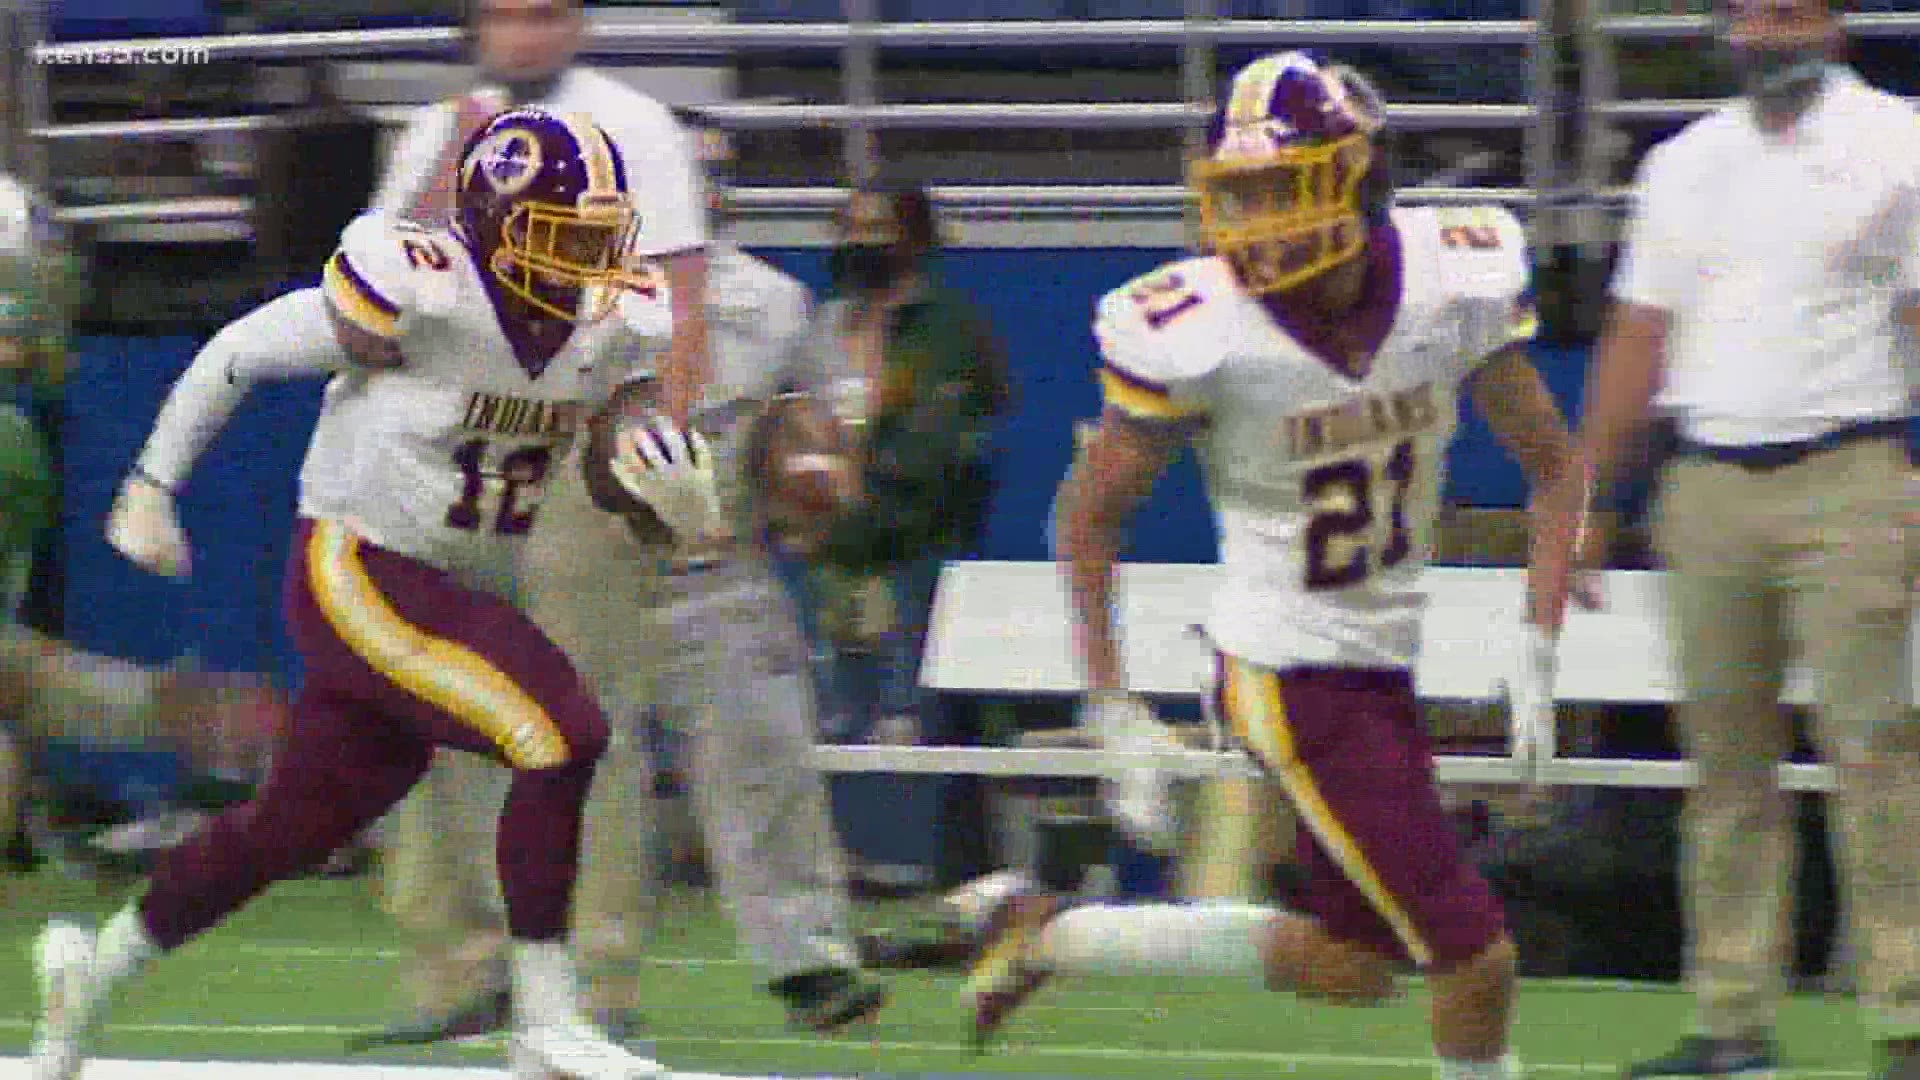 Harlandale's defense was rock-solid to end the regular season.